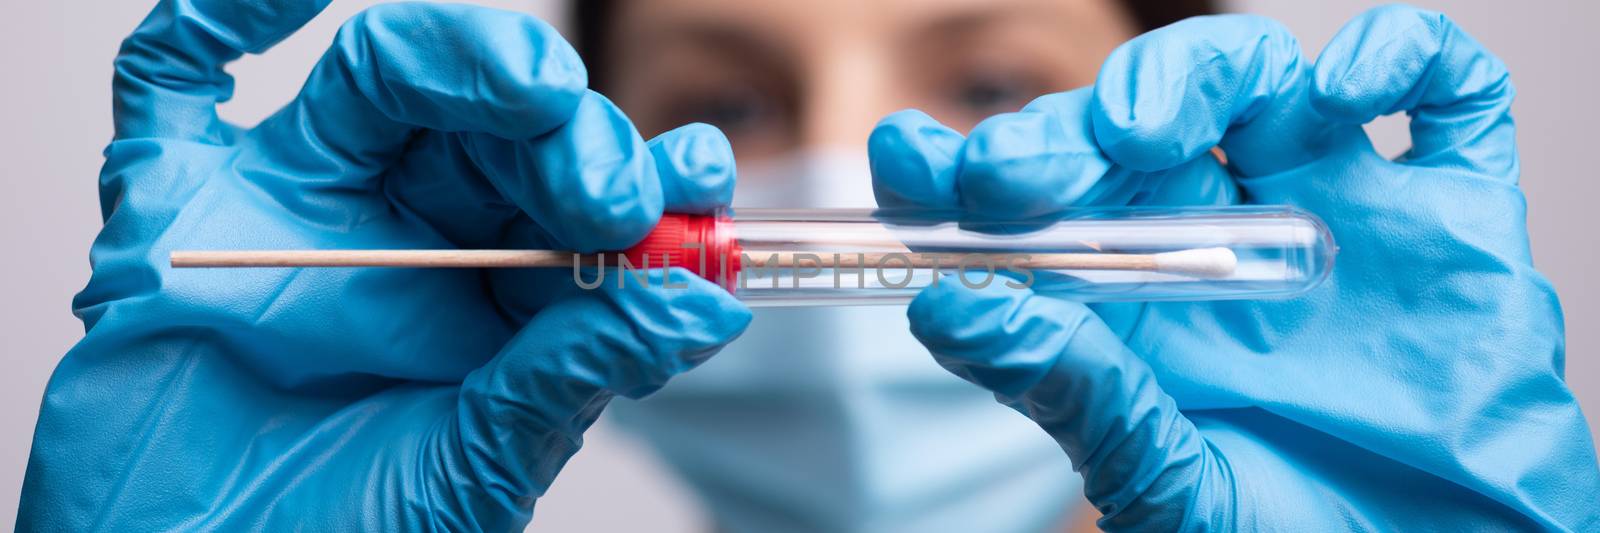 Medical healthcare nurse holding Coronavirus COVID-19 swab test kit, PPE protective mask and gloves, tube for taking OP NP patient specimen sample, PCR DNA RNA testing protocol process stock photo